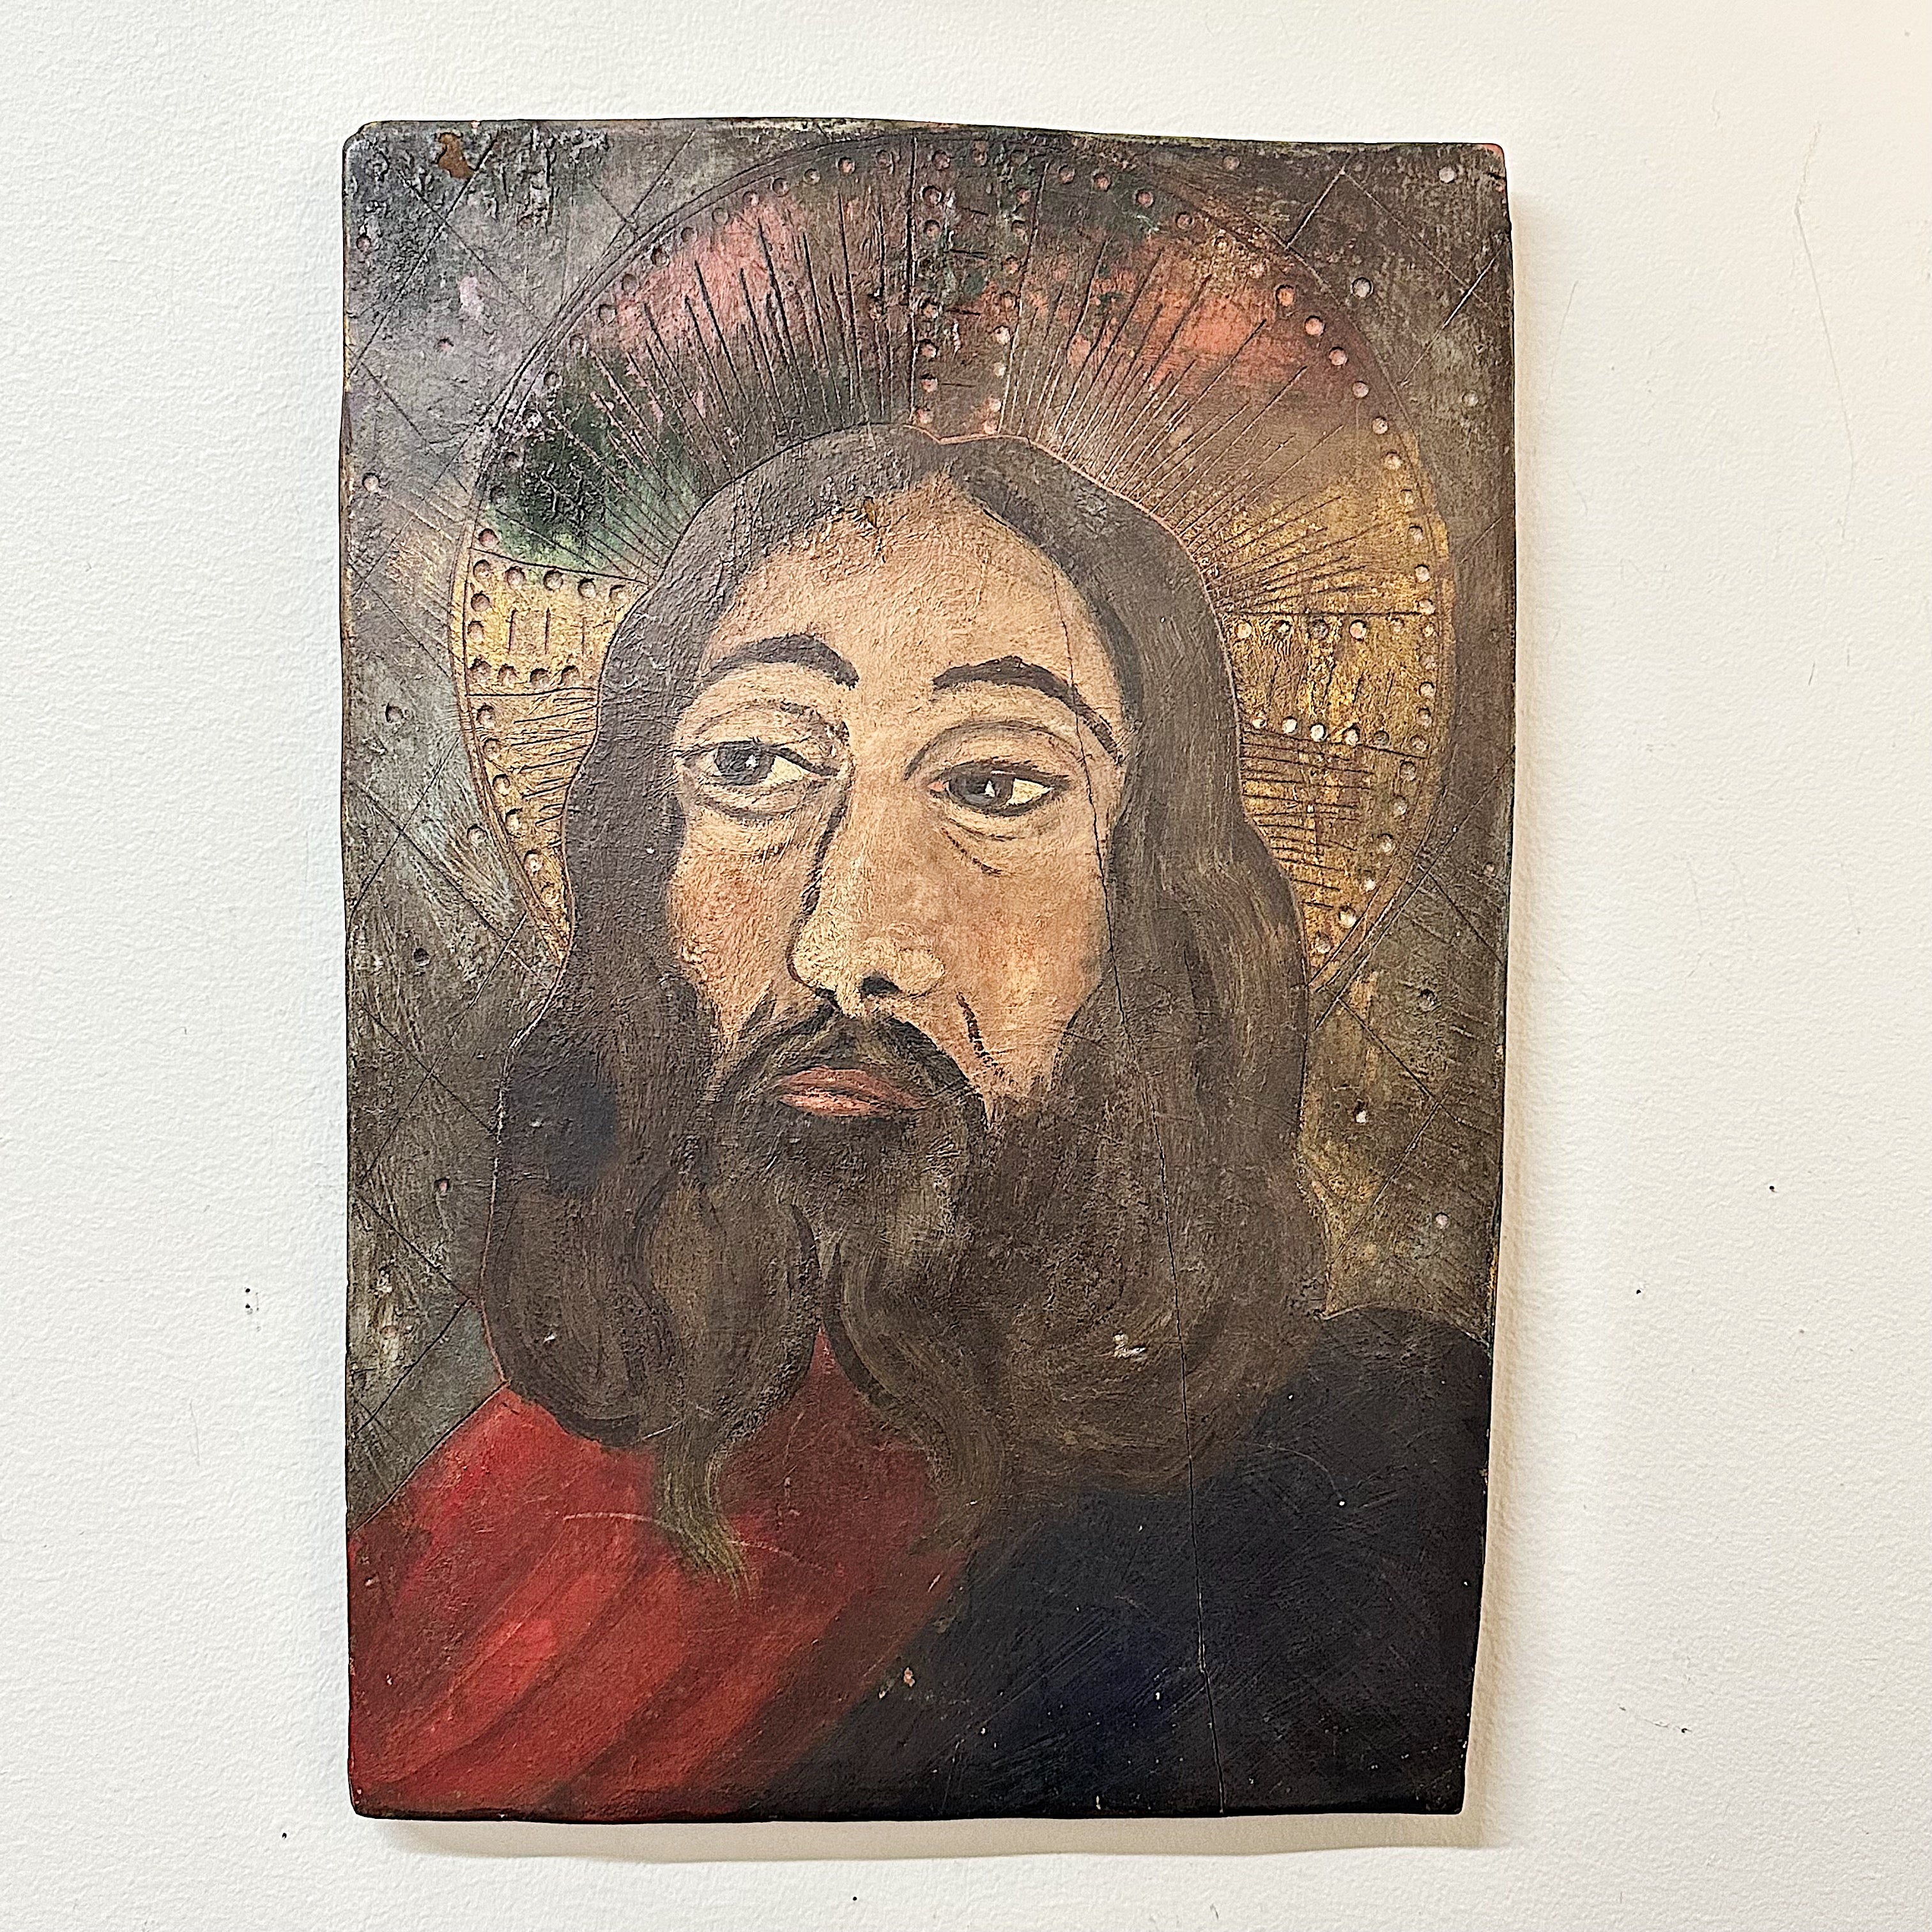 Rare Antique Retablo Painting of Jesus - Turn of the Century Folk Art - Rare Spanish Colonial Art - Early 1900s Iconic Paintings - Carved Wood